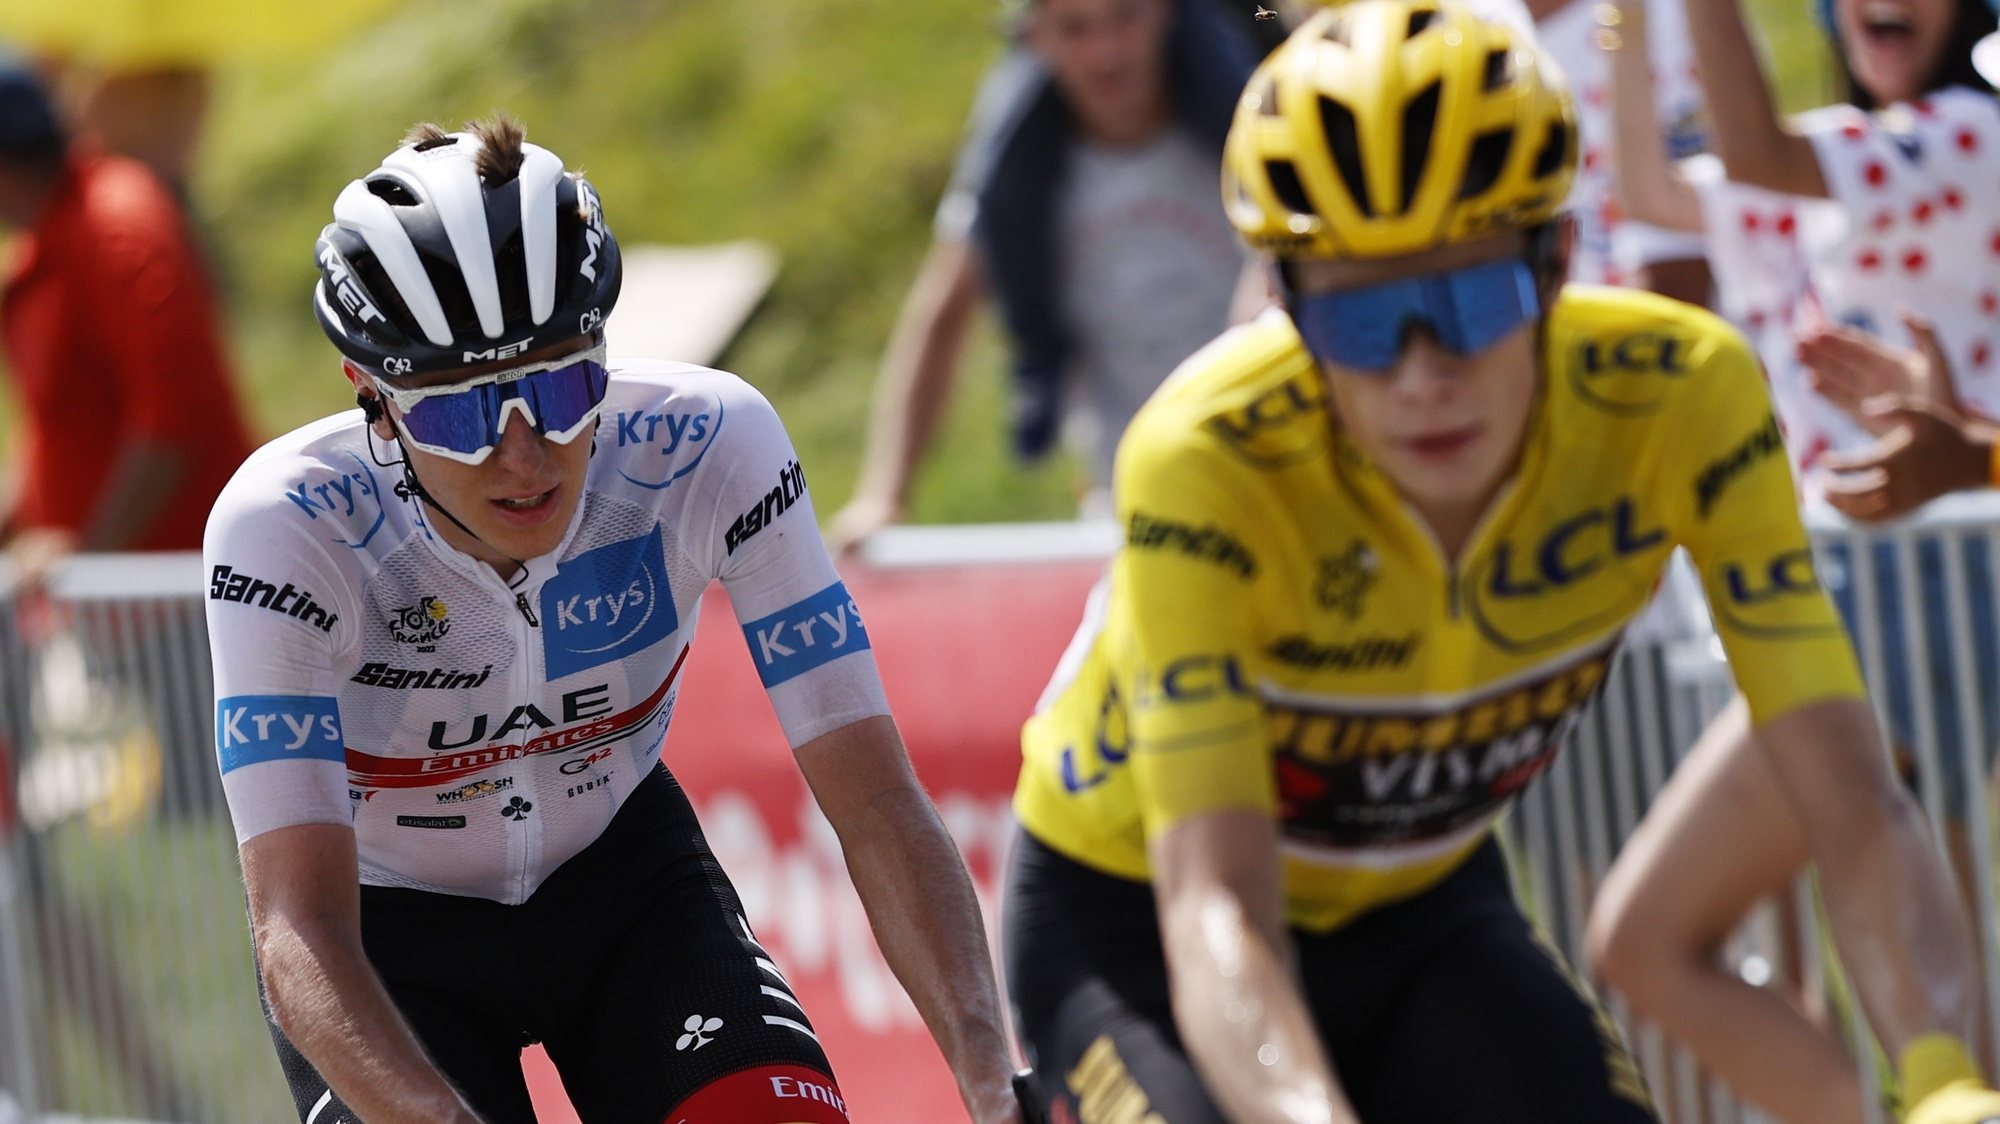 epa10082298 The Yellow Jersey Danish rider Jonas Vingegaard (R) of Jumbo Visma and Slovenian rider Tadej Pogacar (L) of UAE Team Emirates in action during the 17th stage of the Tour de France 2022 over 129.7km from Saint Gaudens to Peyragudes, France, 20 July 2022.  EPA/YOAN VALAT